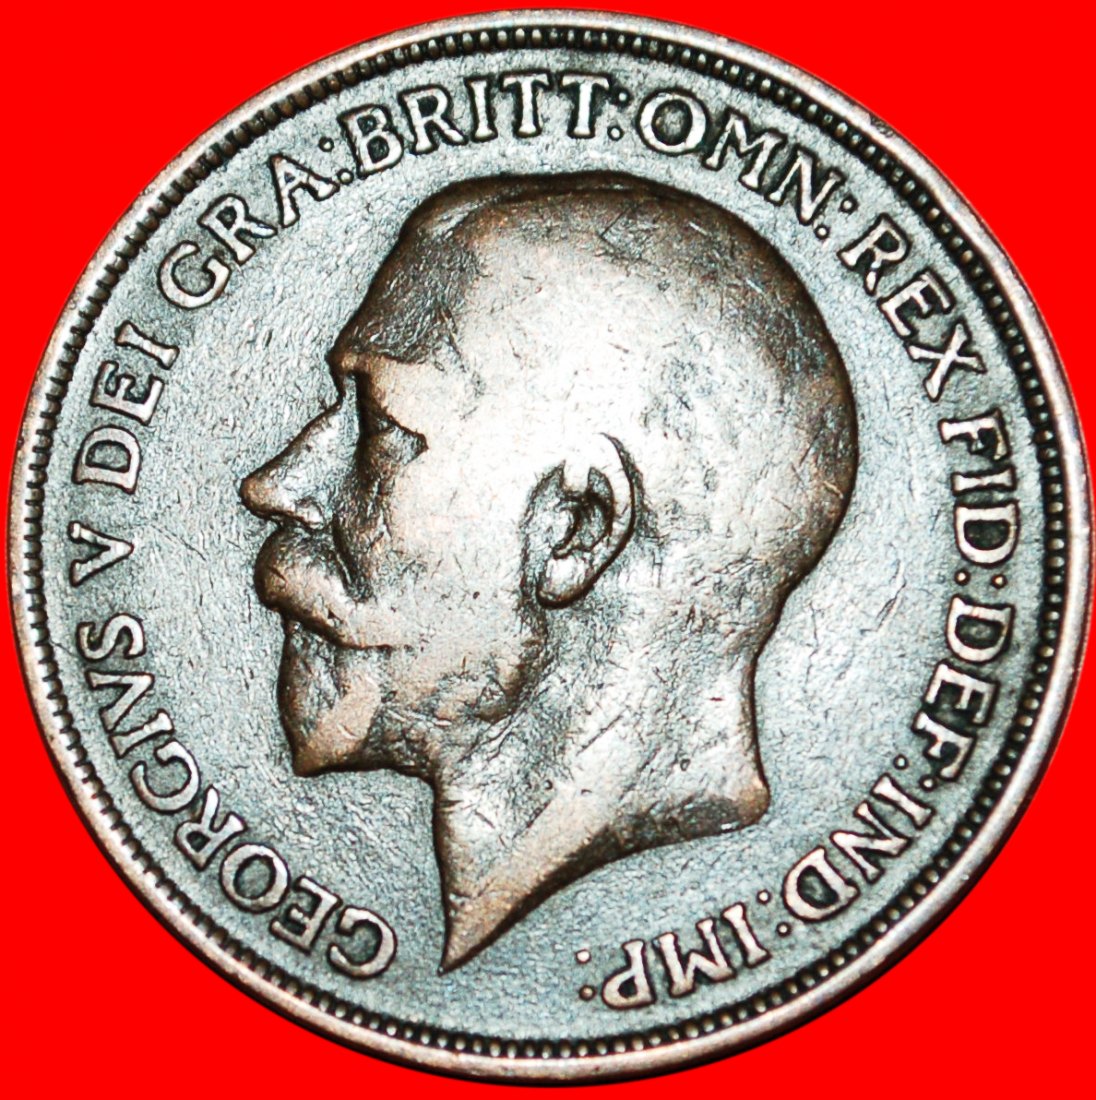  * GREAT BRITAIN: UNITED KINGDOM ★PENNY 1915! GEORGE V (1911-1936) ★LOW START ★ NO RESERVE!   